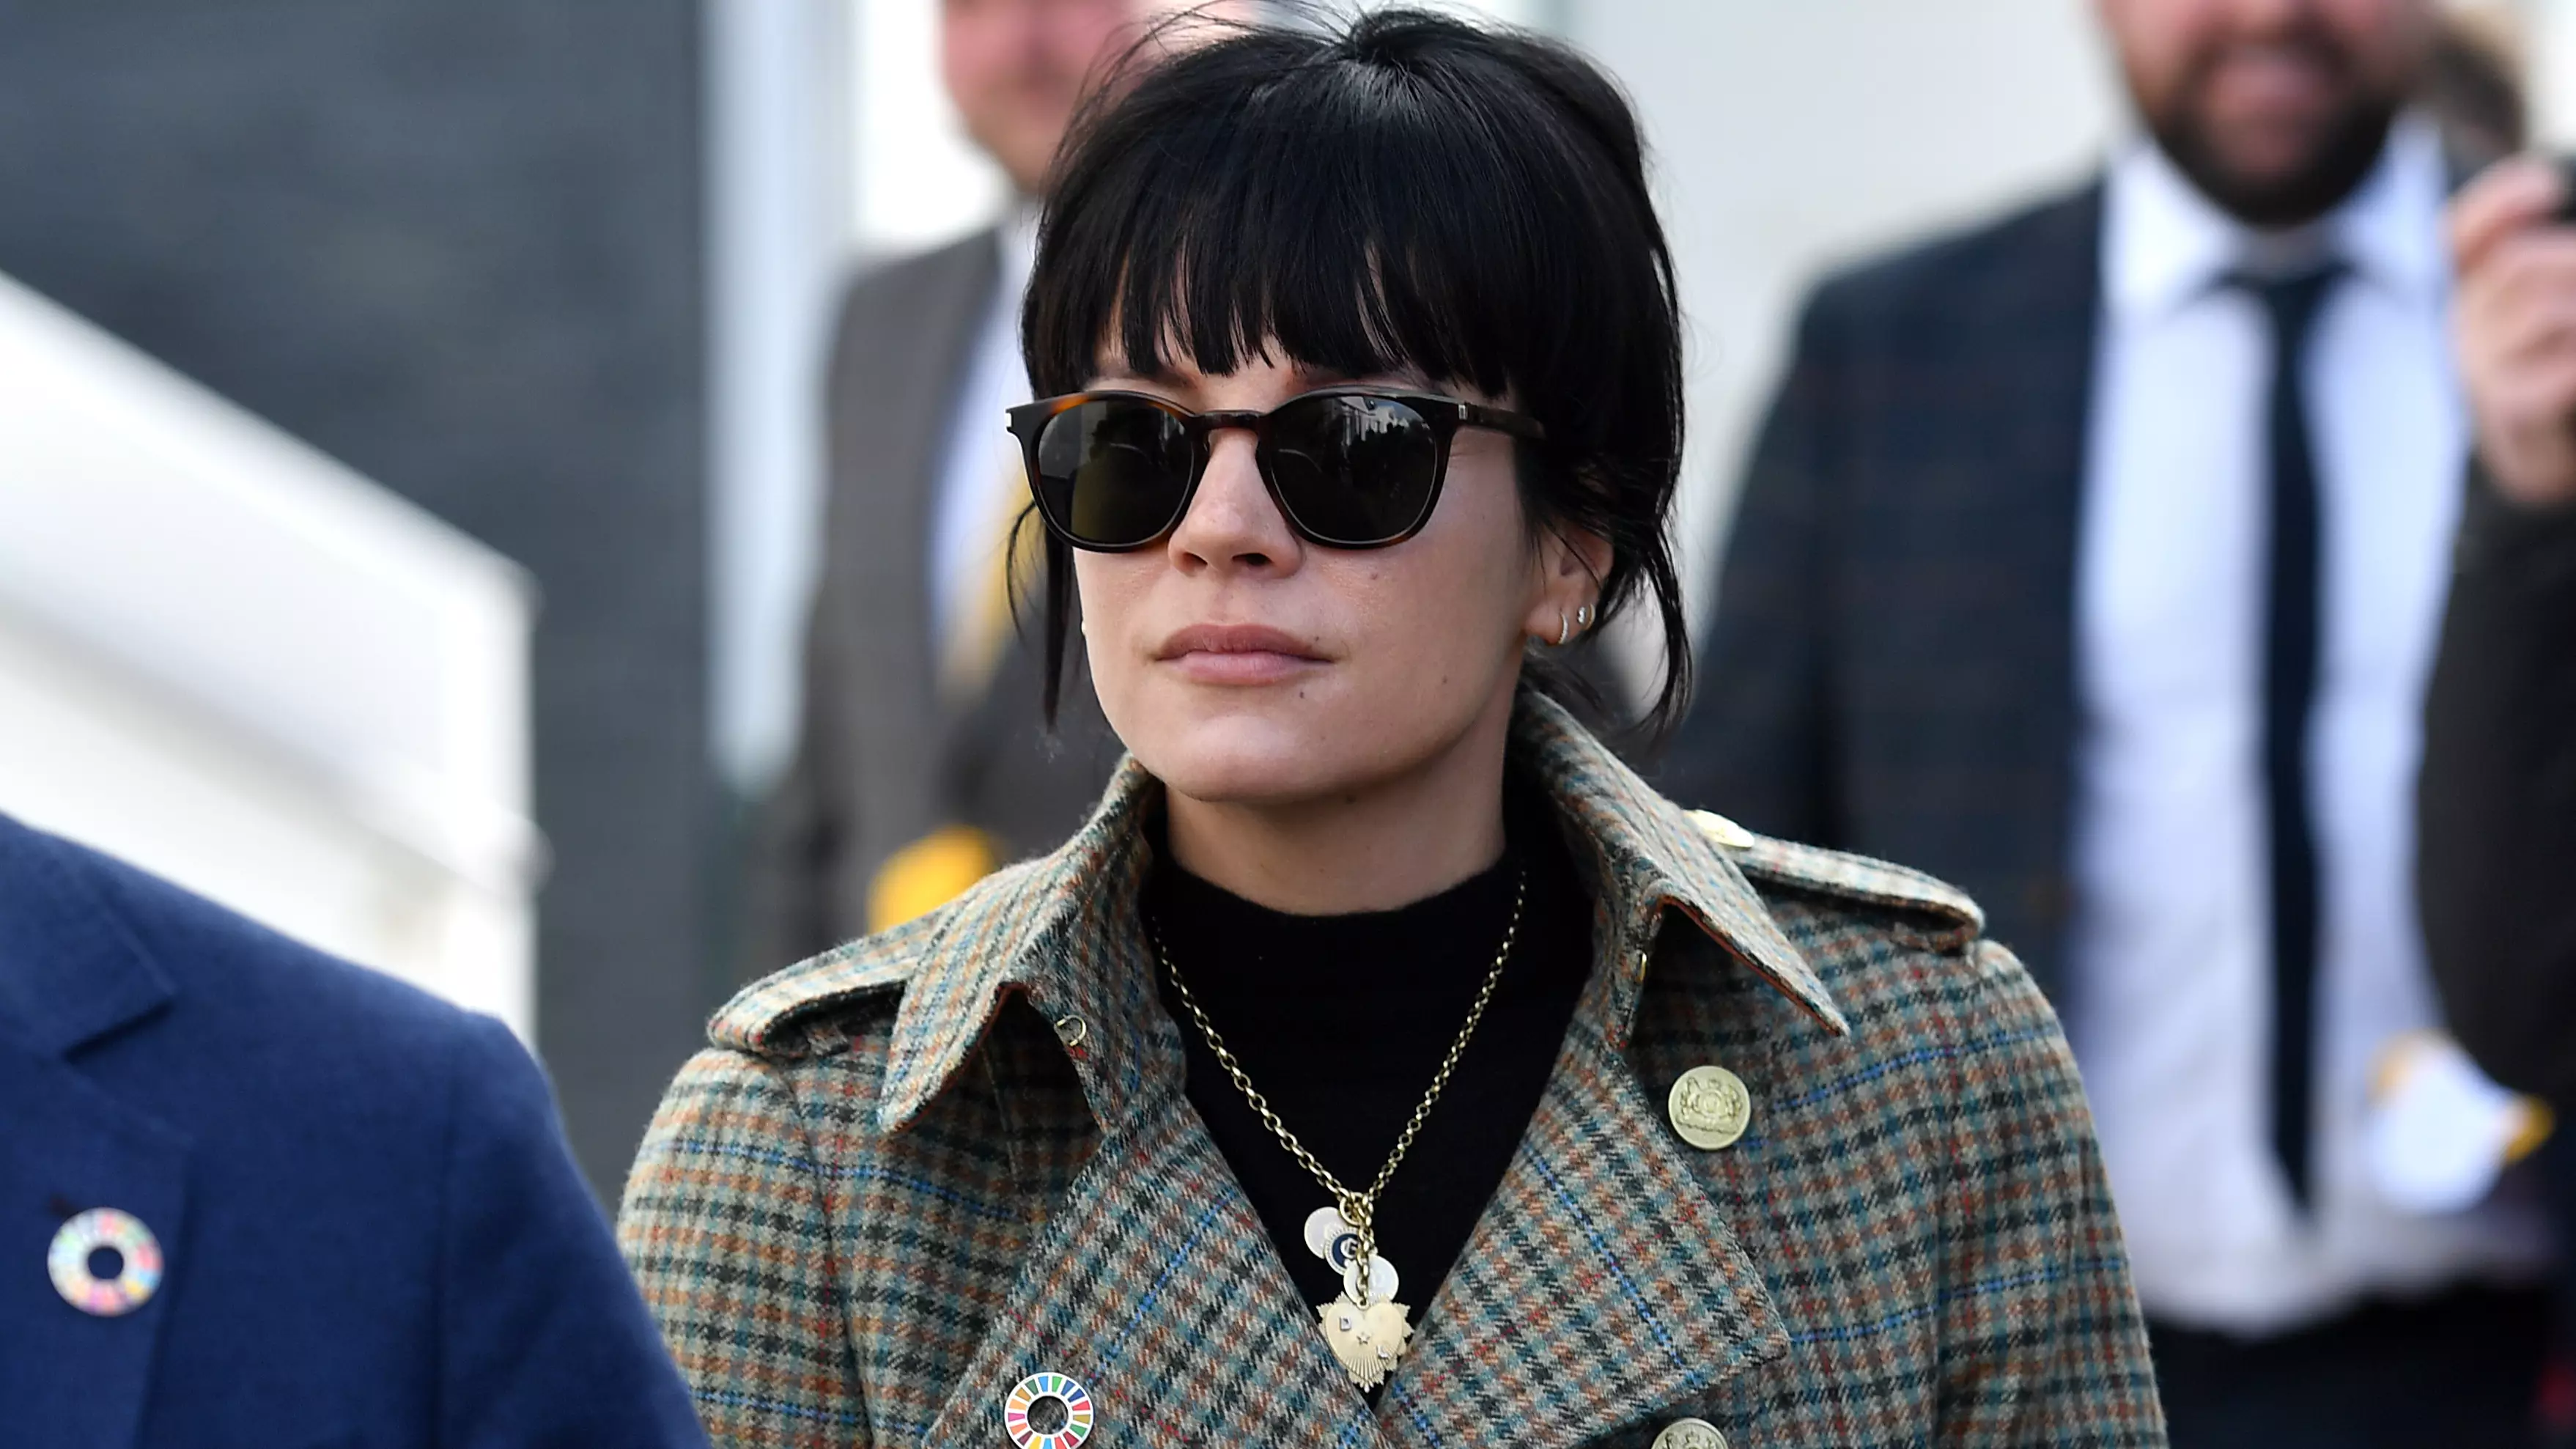 Lily Allen Called Out Over Response To Meme Mocking Prince Philip's Death